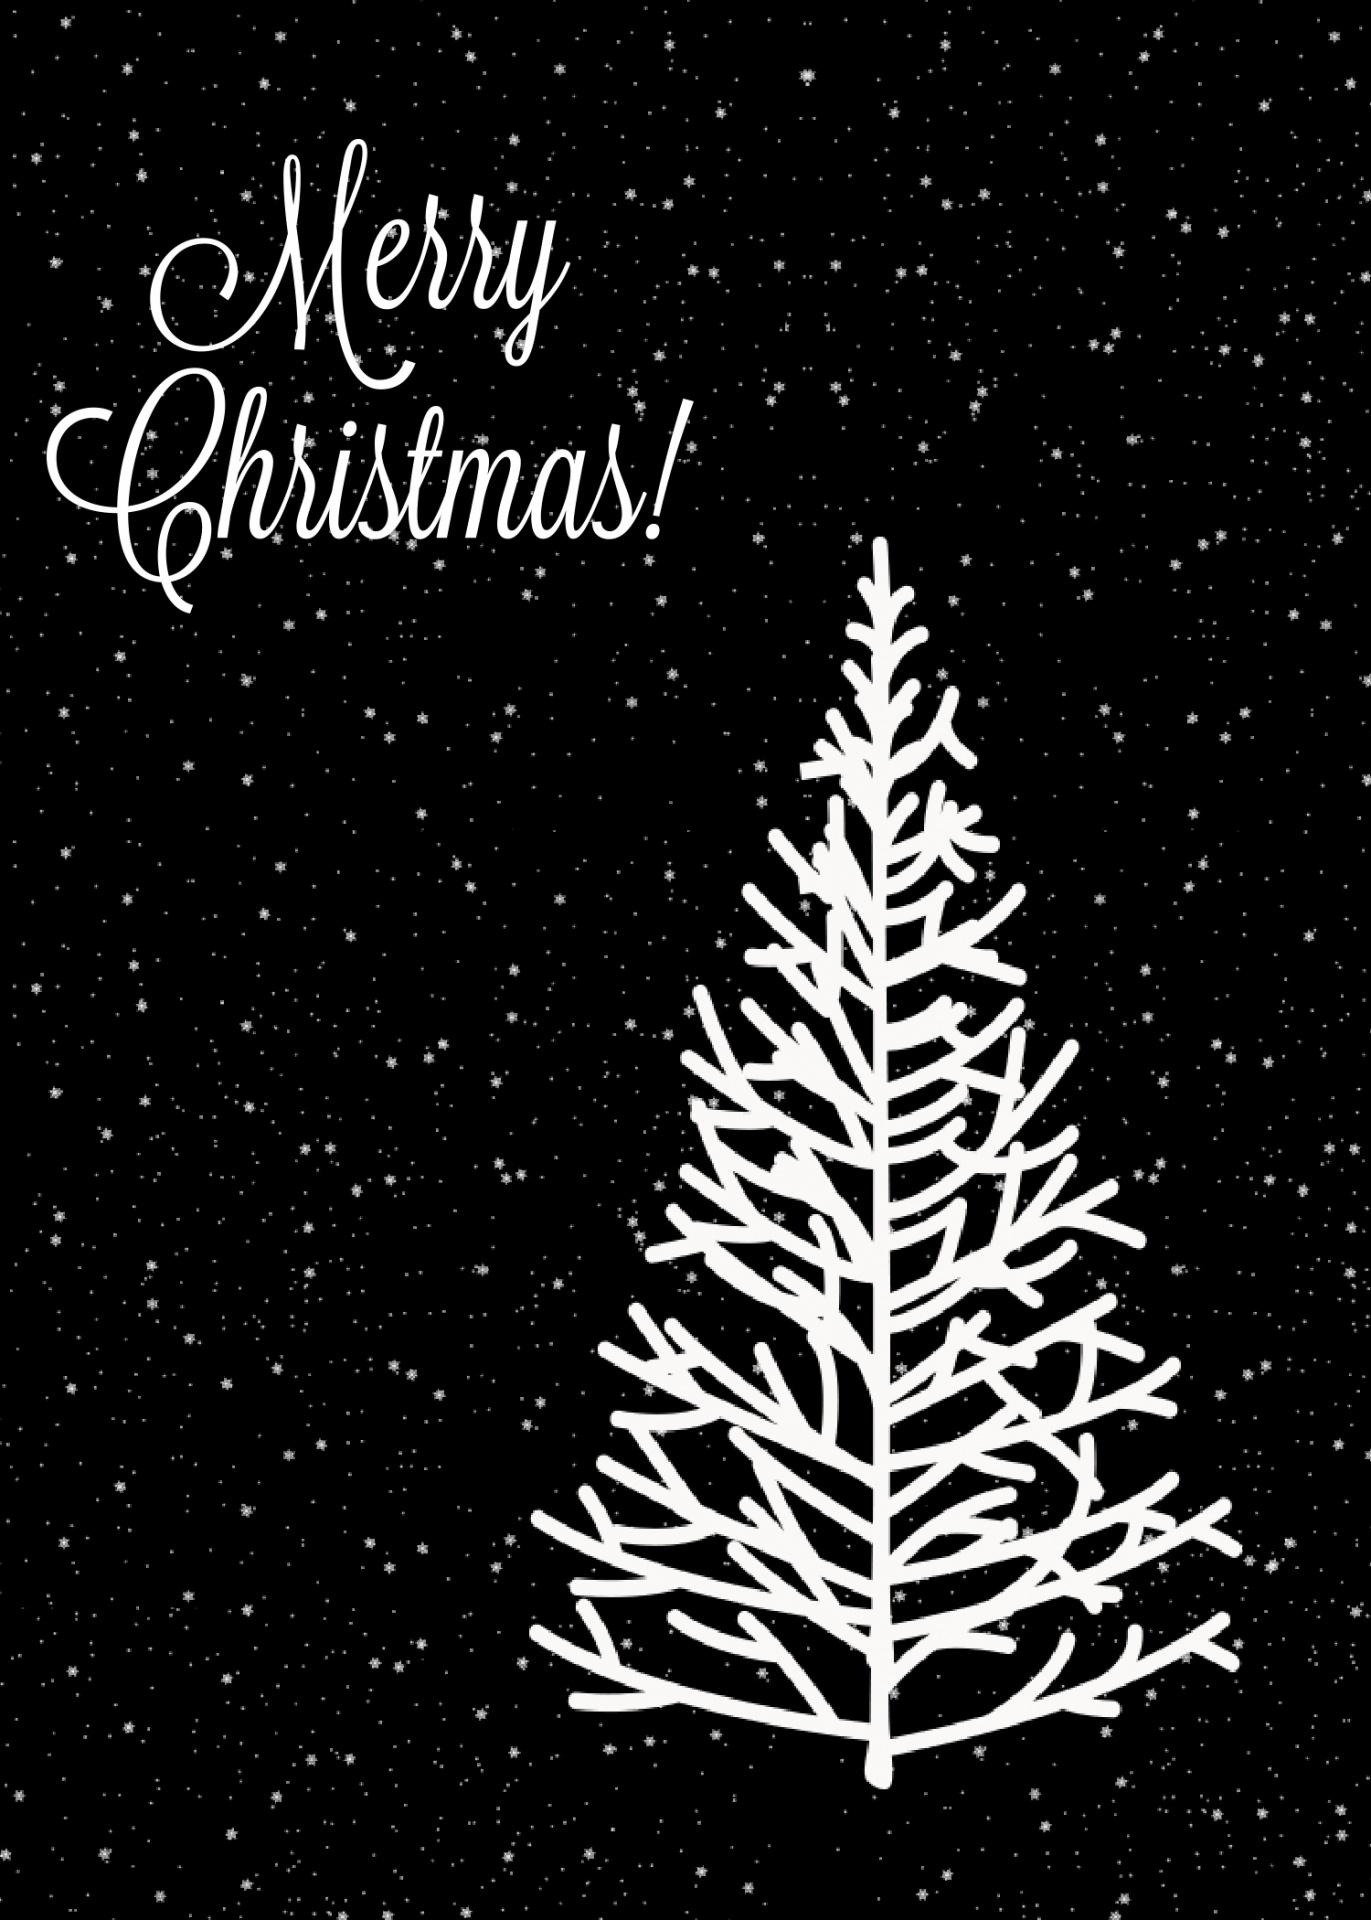 snowy black background with a simple white silhouette snowy tree with Merry Christmas Greeting